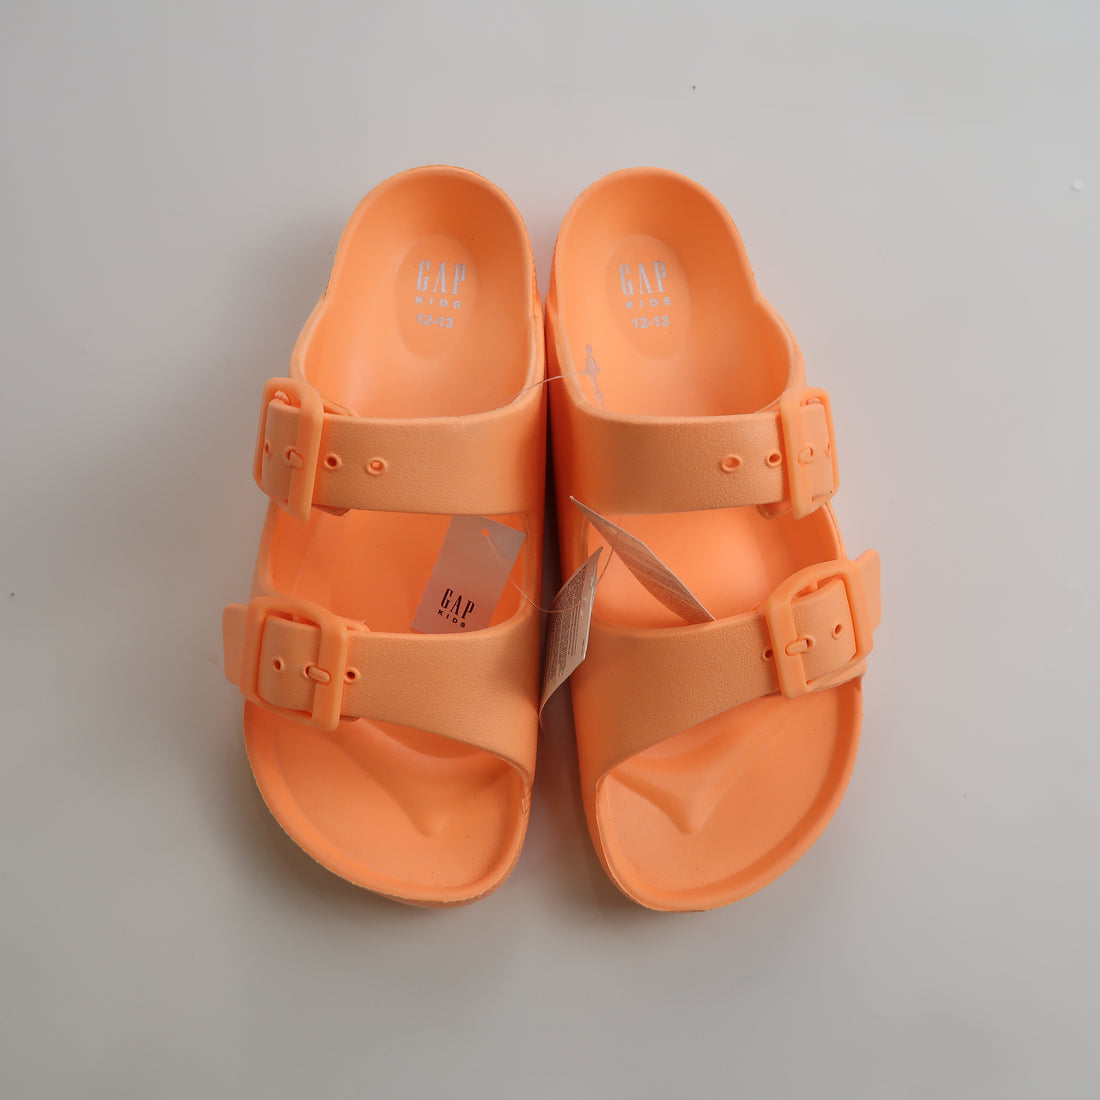 Gap - Sandals (Shoes - 12/13) *new with tag